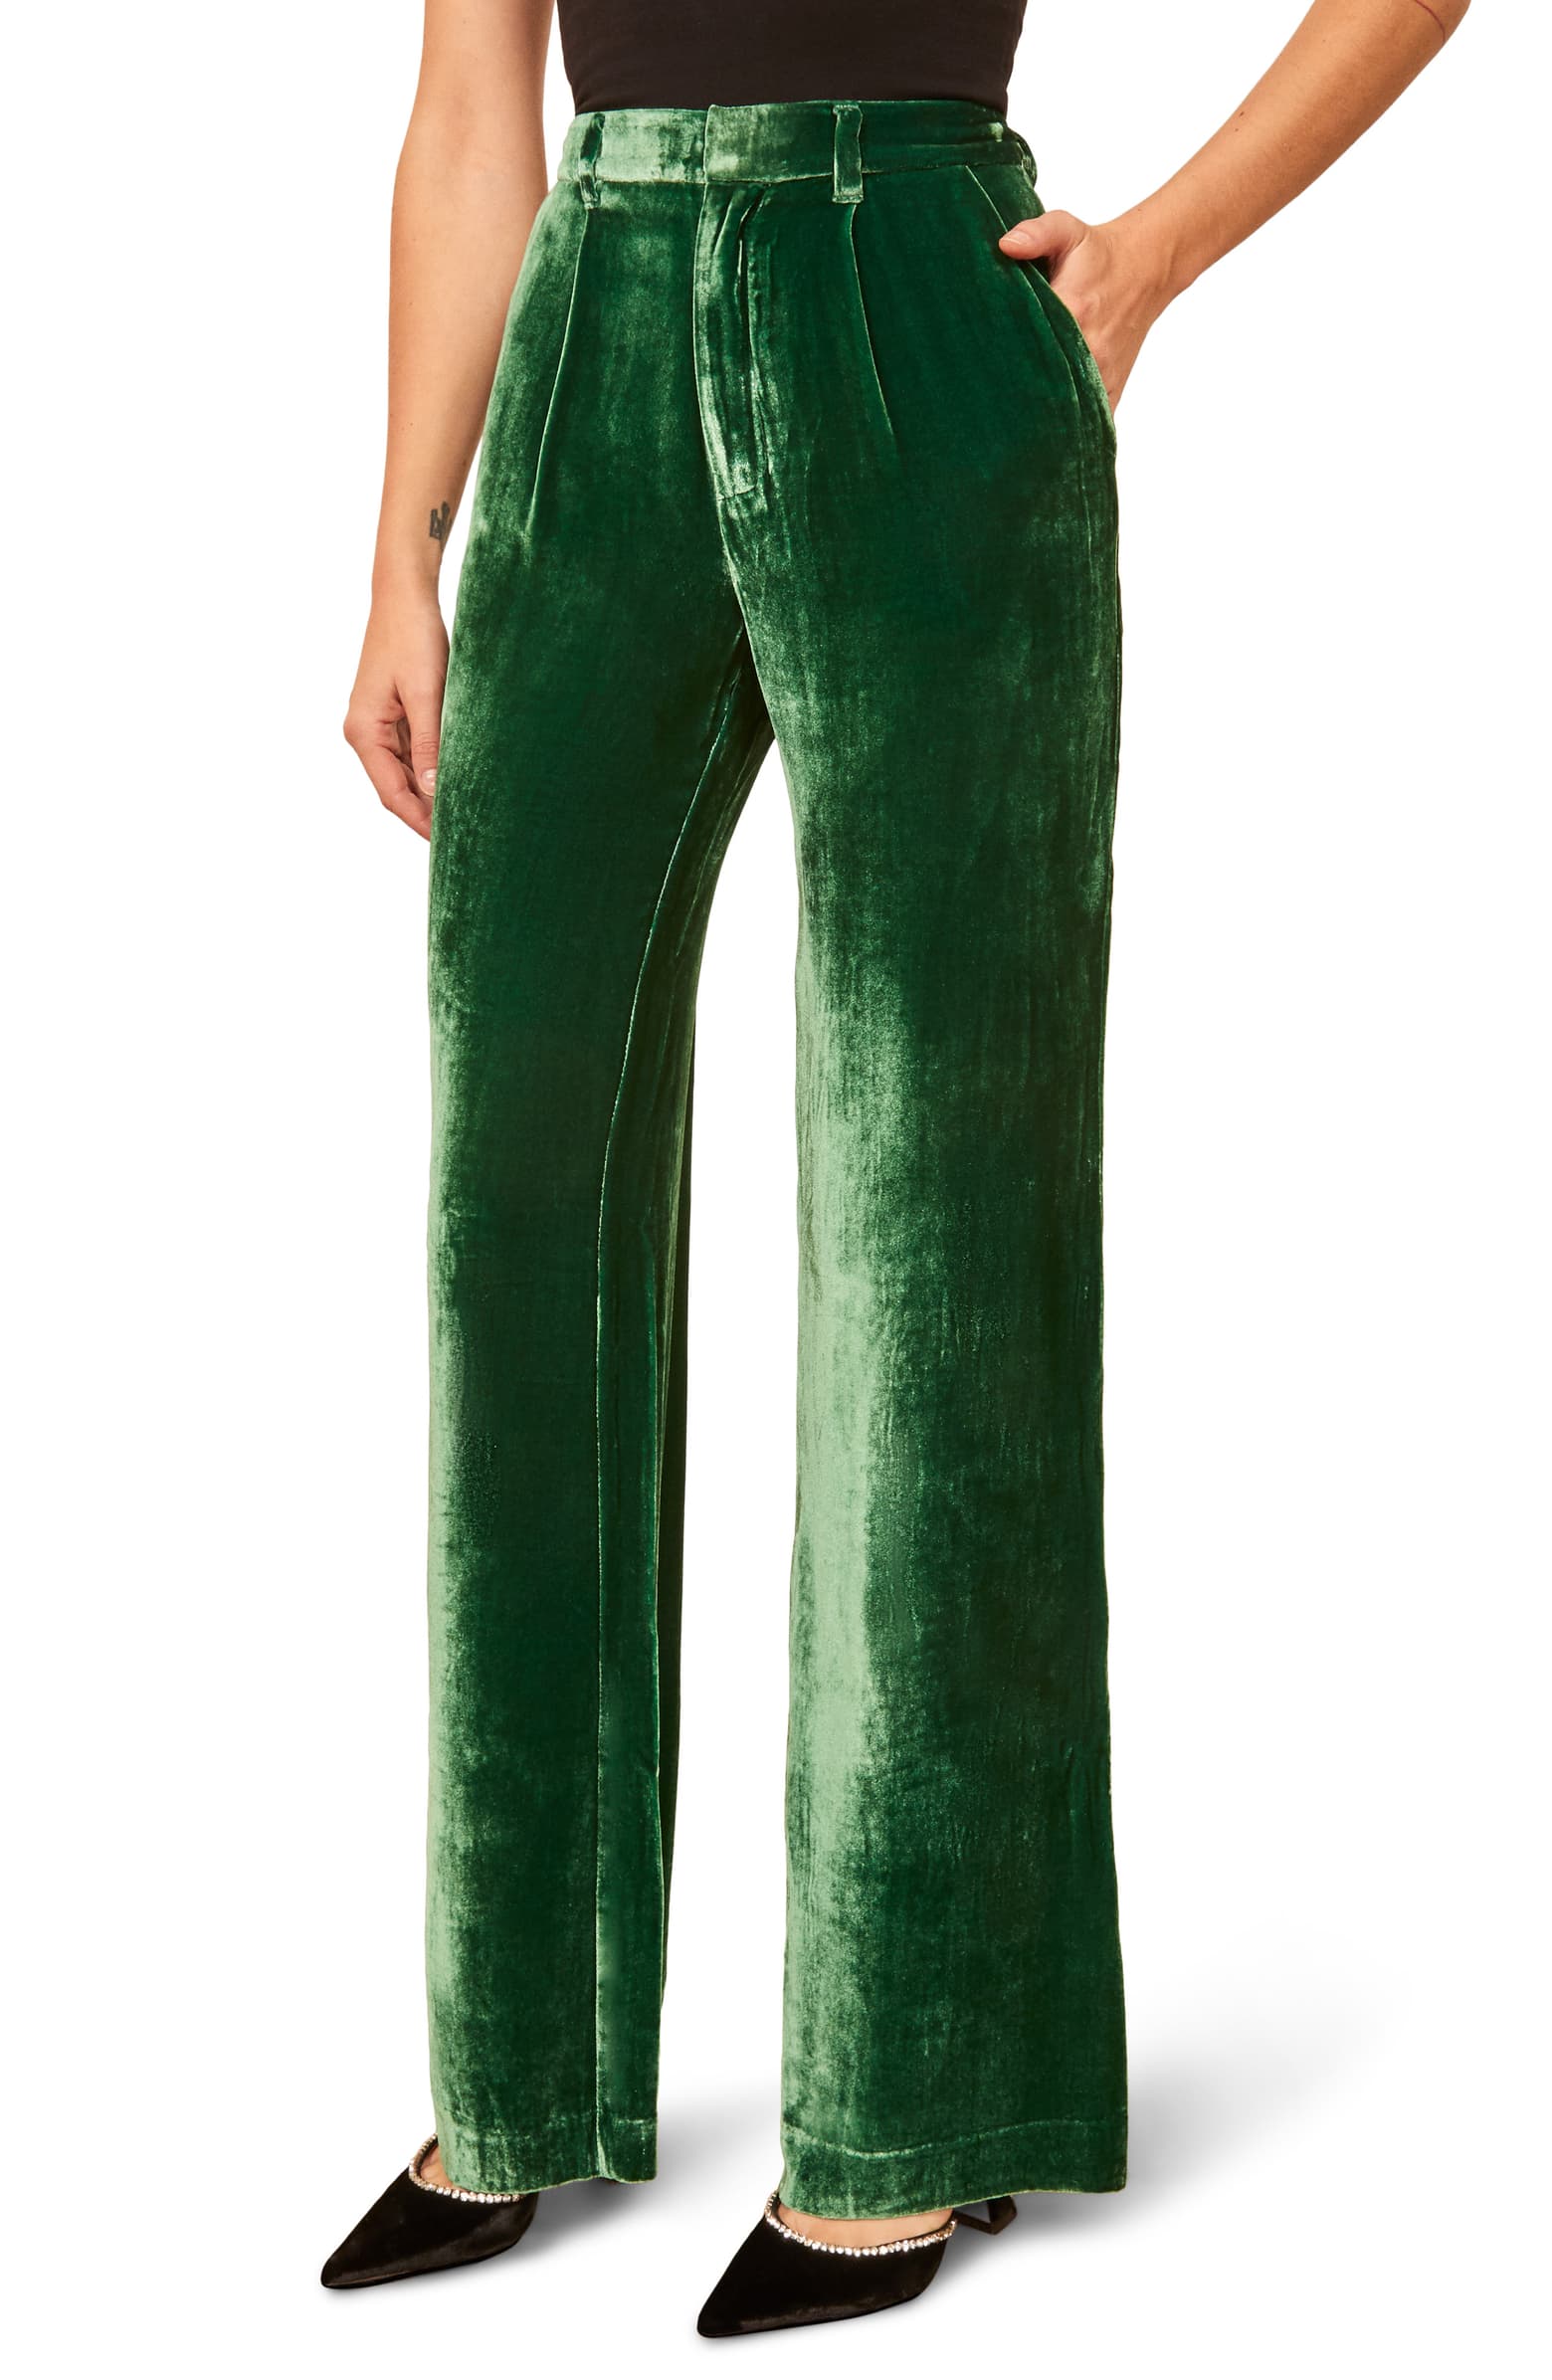 Celebrate Your Dramatic Ways With These Attention-Grabbing Pants!